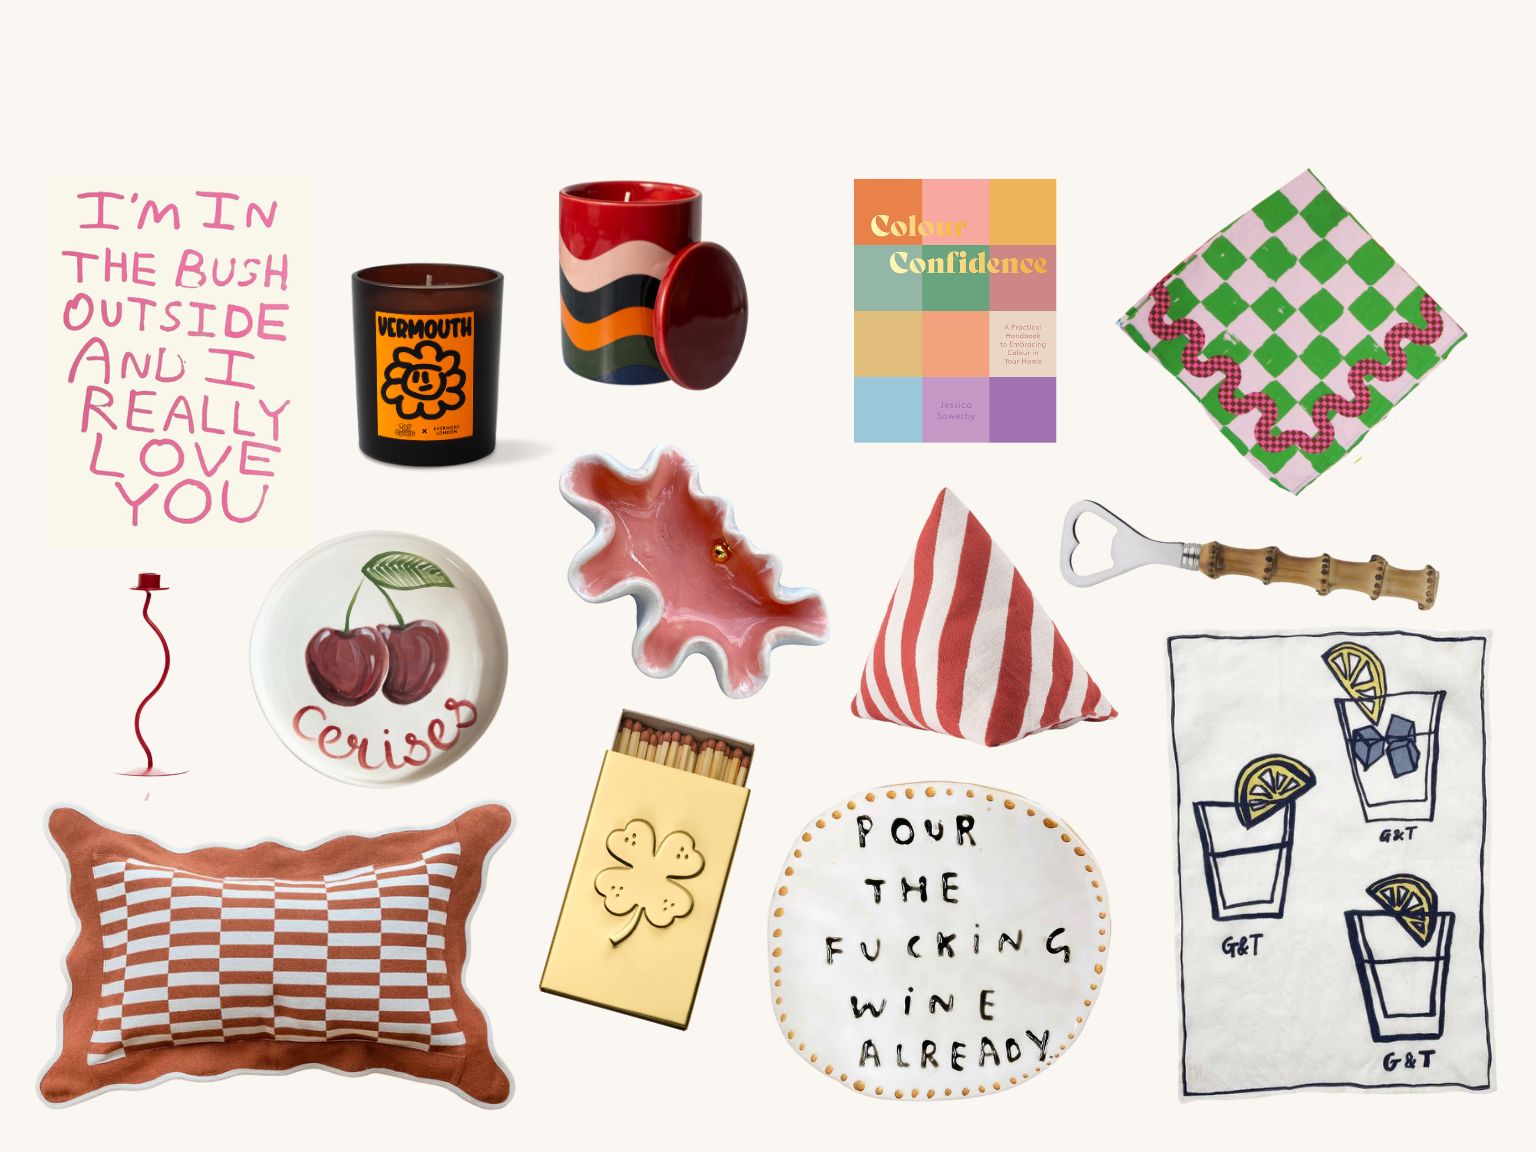 Selection of interior gifts to gift interior lovers at Christmas